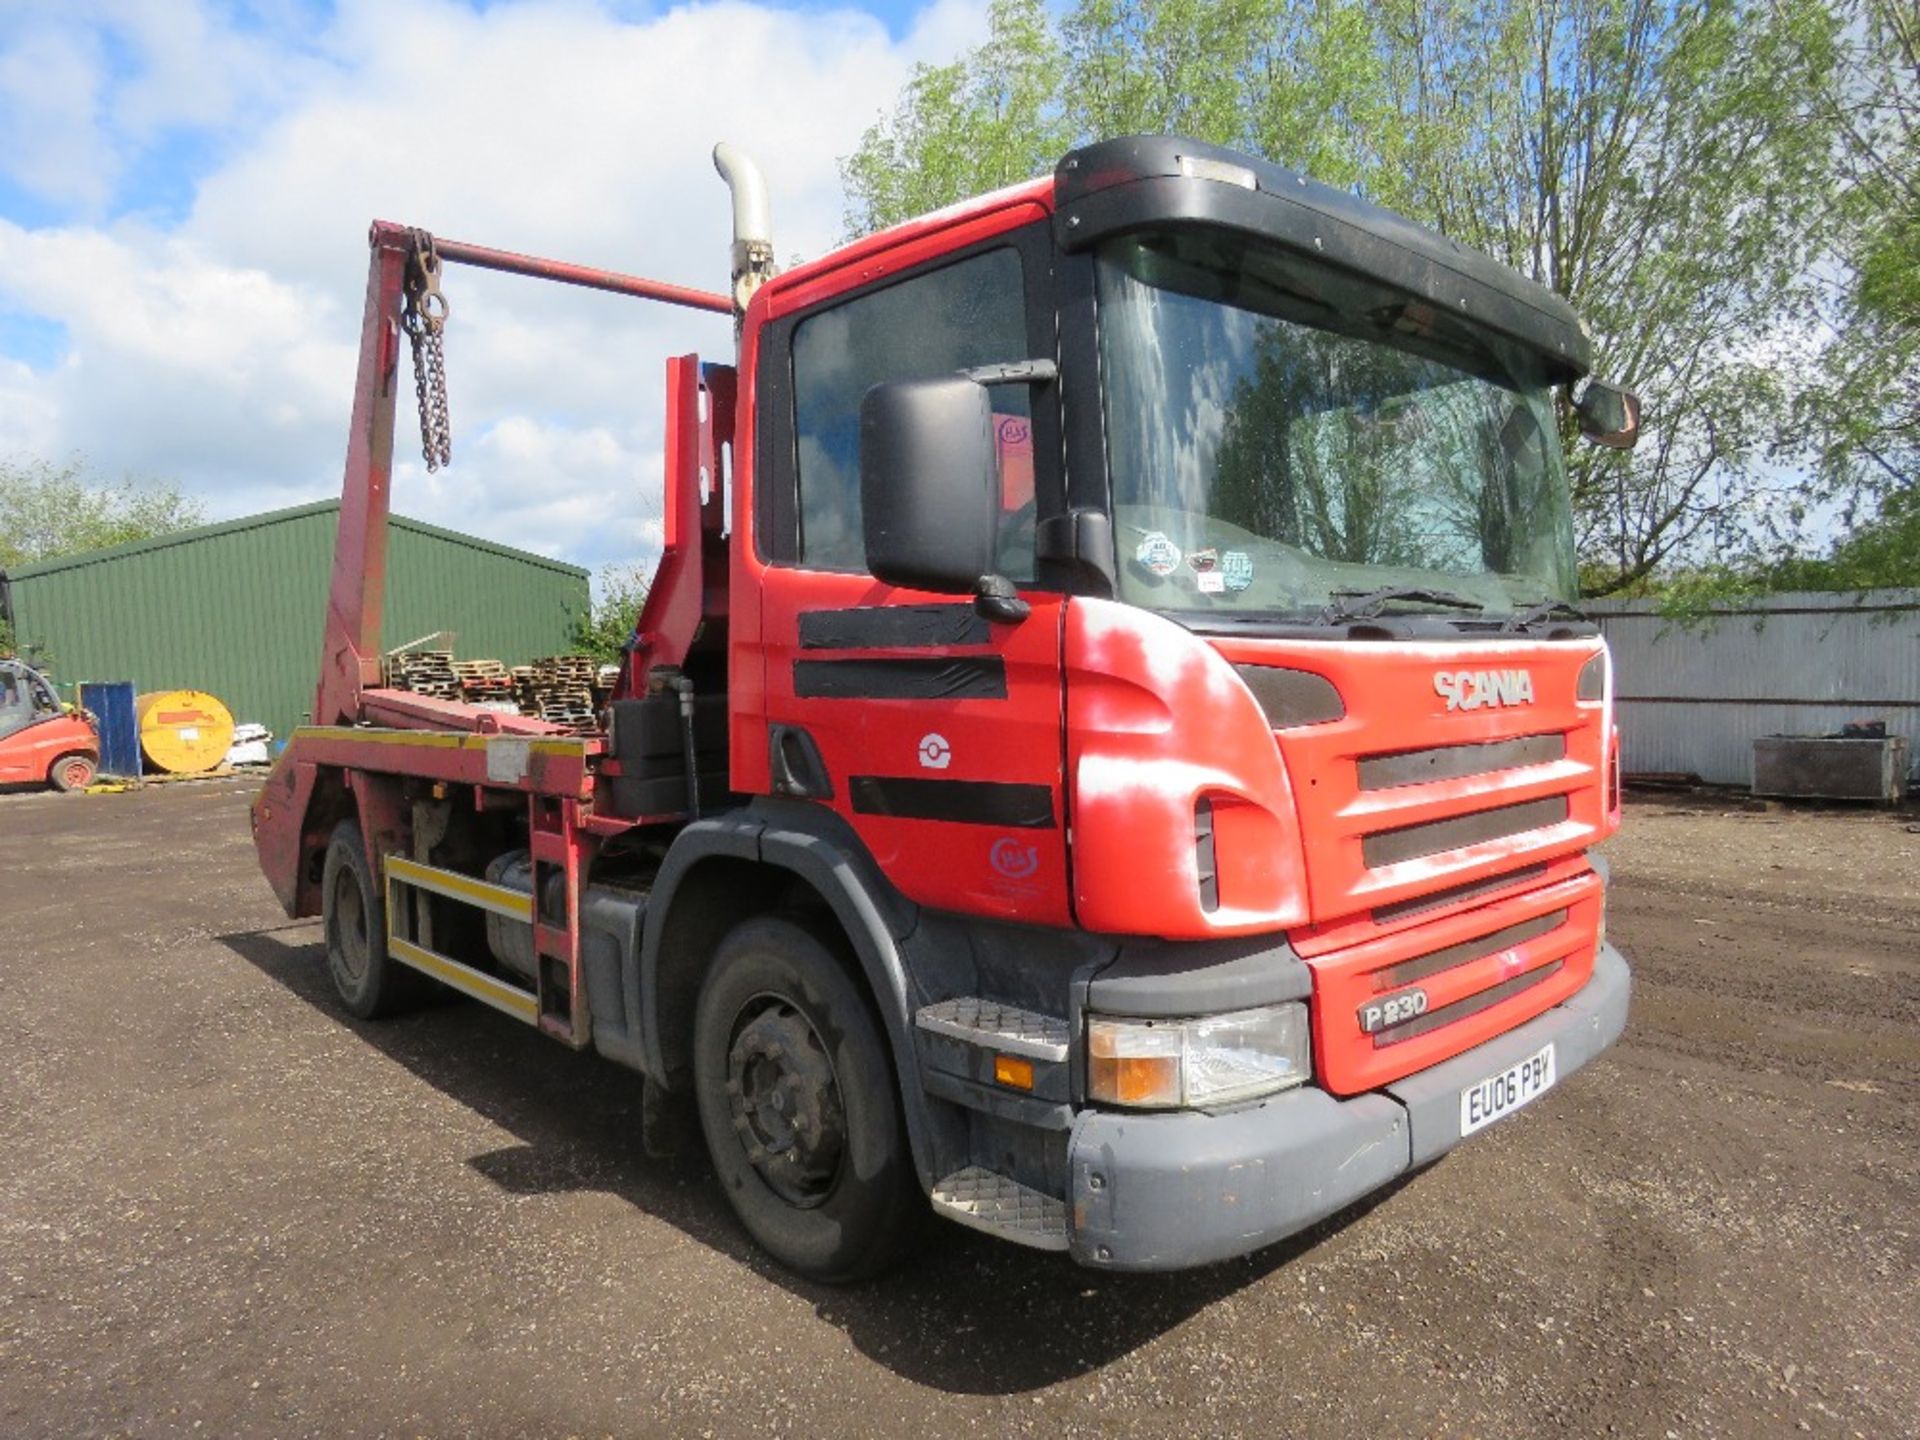 SCANIA P230 4X2 CHAIN LIFT SKIP LORRY YEAR 2006. MANUAL GEARBOX. 18 TONNE RATED,